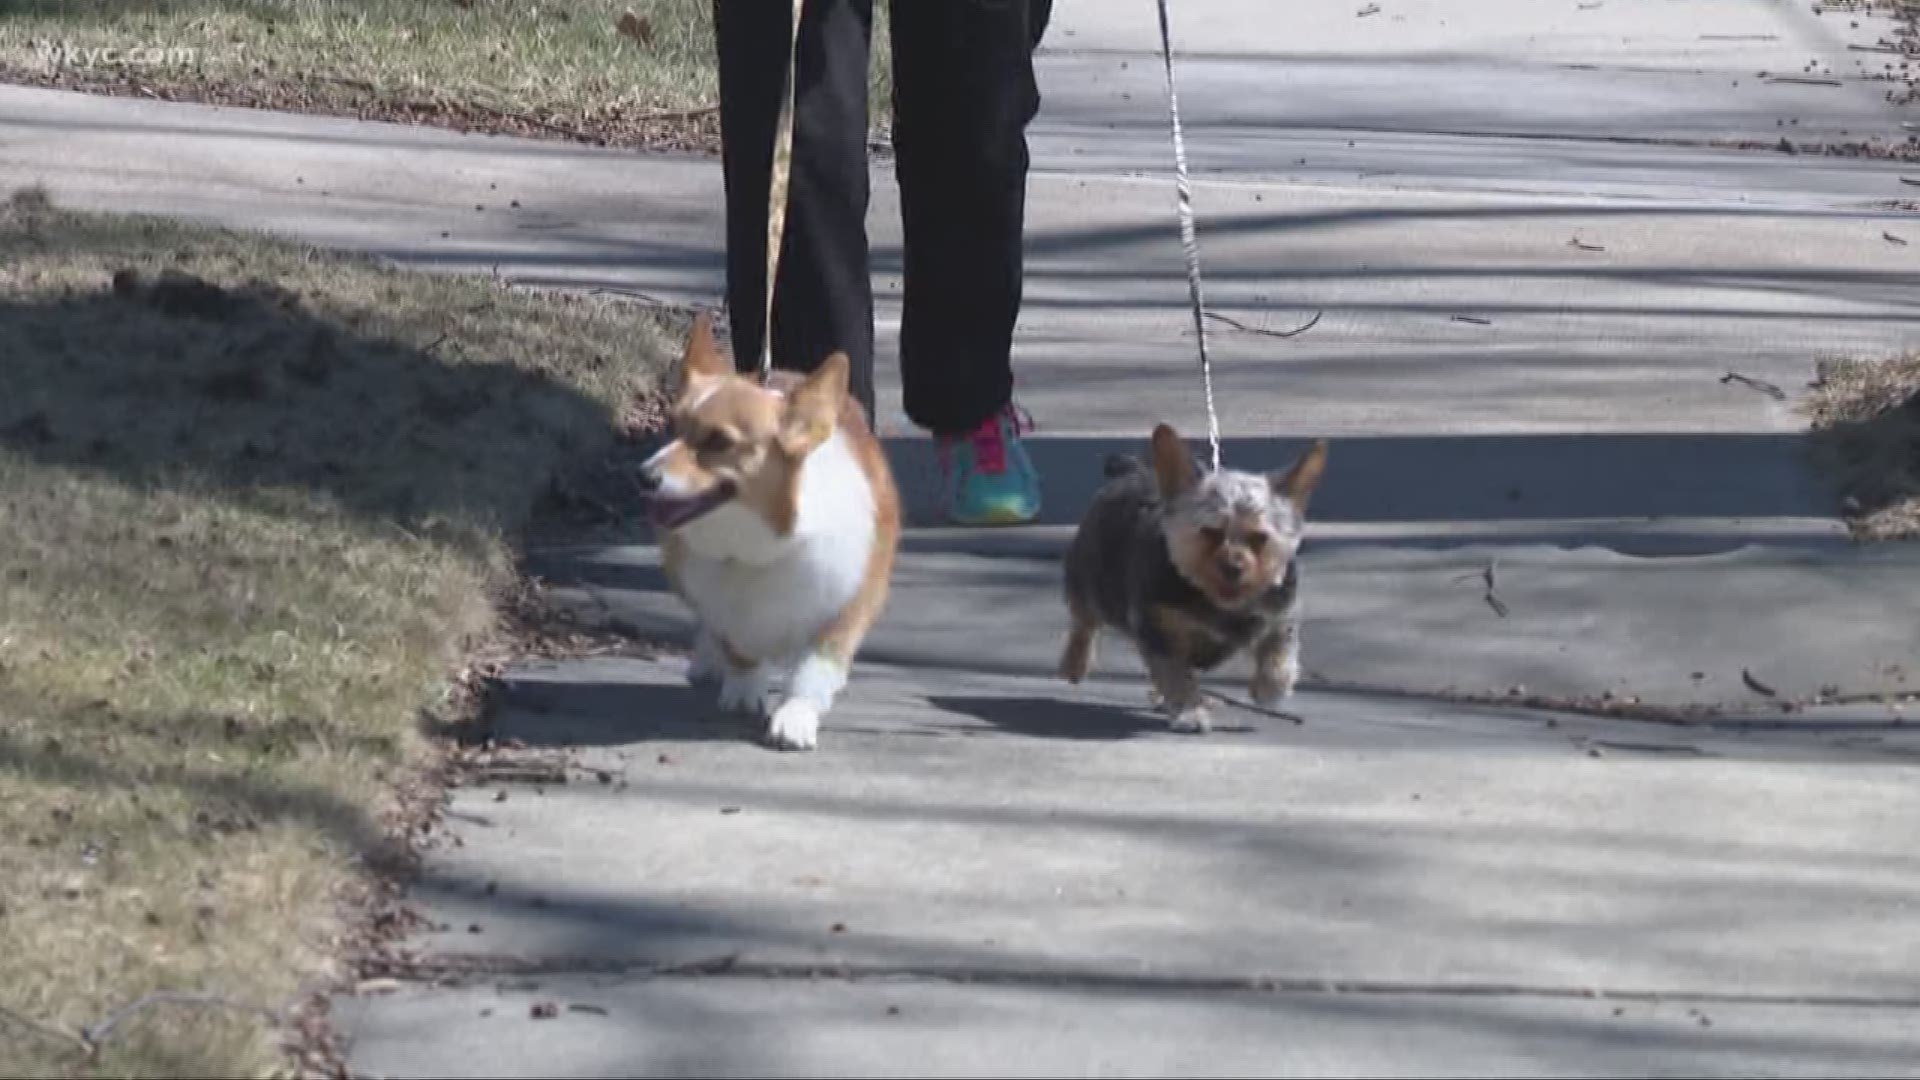 Dog leash laws of discussion in Lakewood